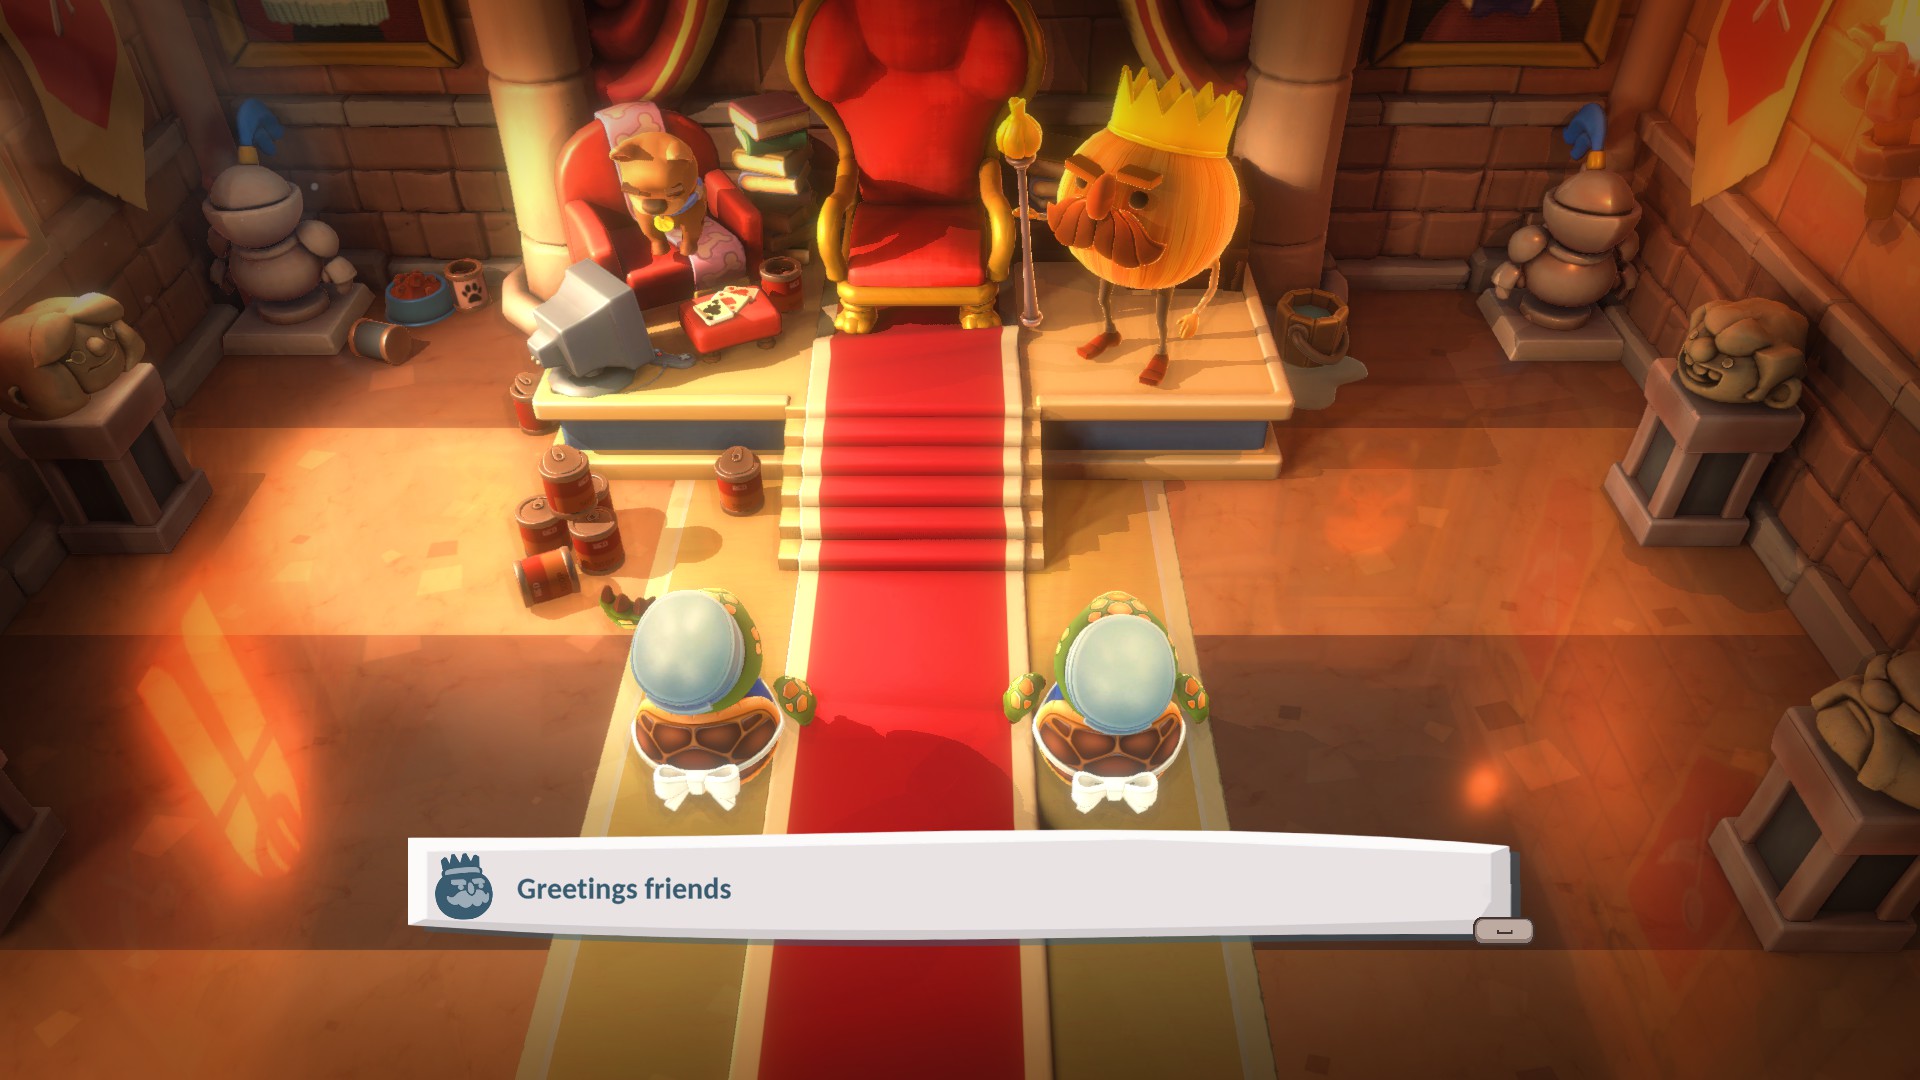 Is Overcooked 2 Crossplay or Cross Platform? [2023 Guide] - Player